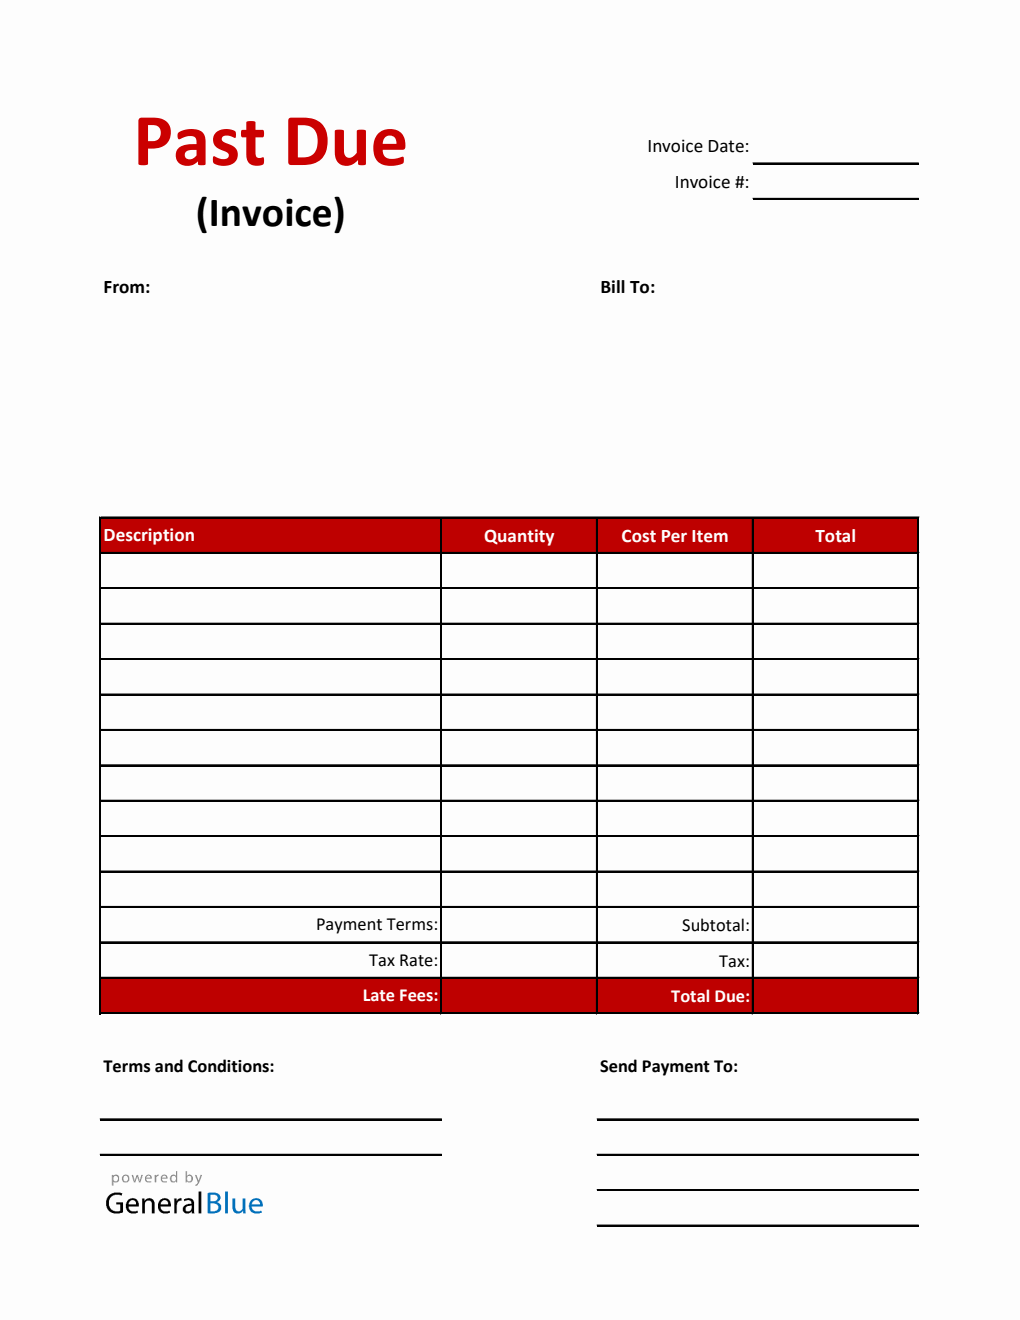 Past Due Invoice in Excel (Basic)